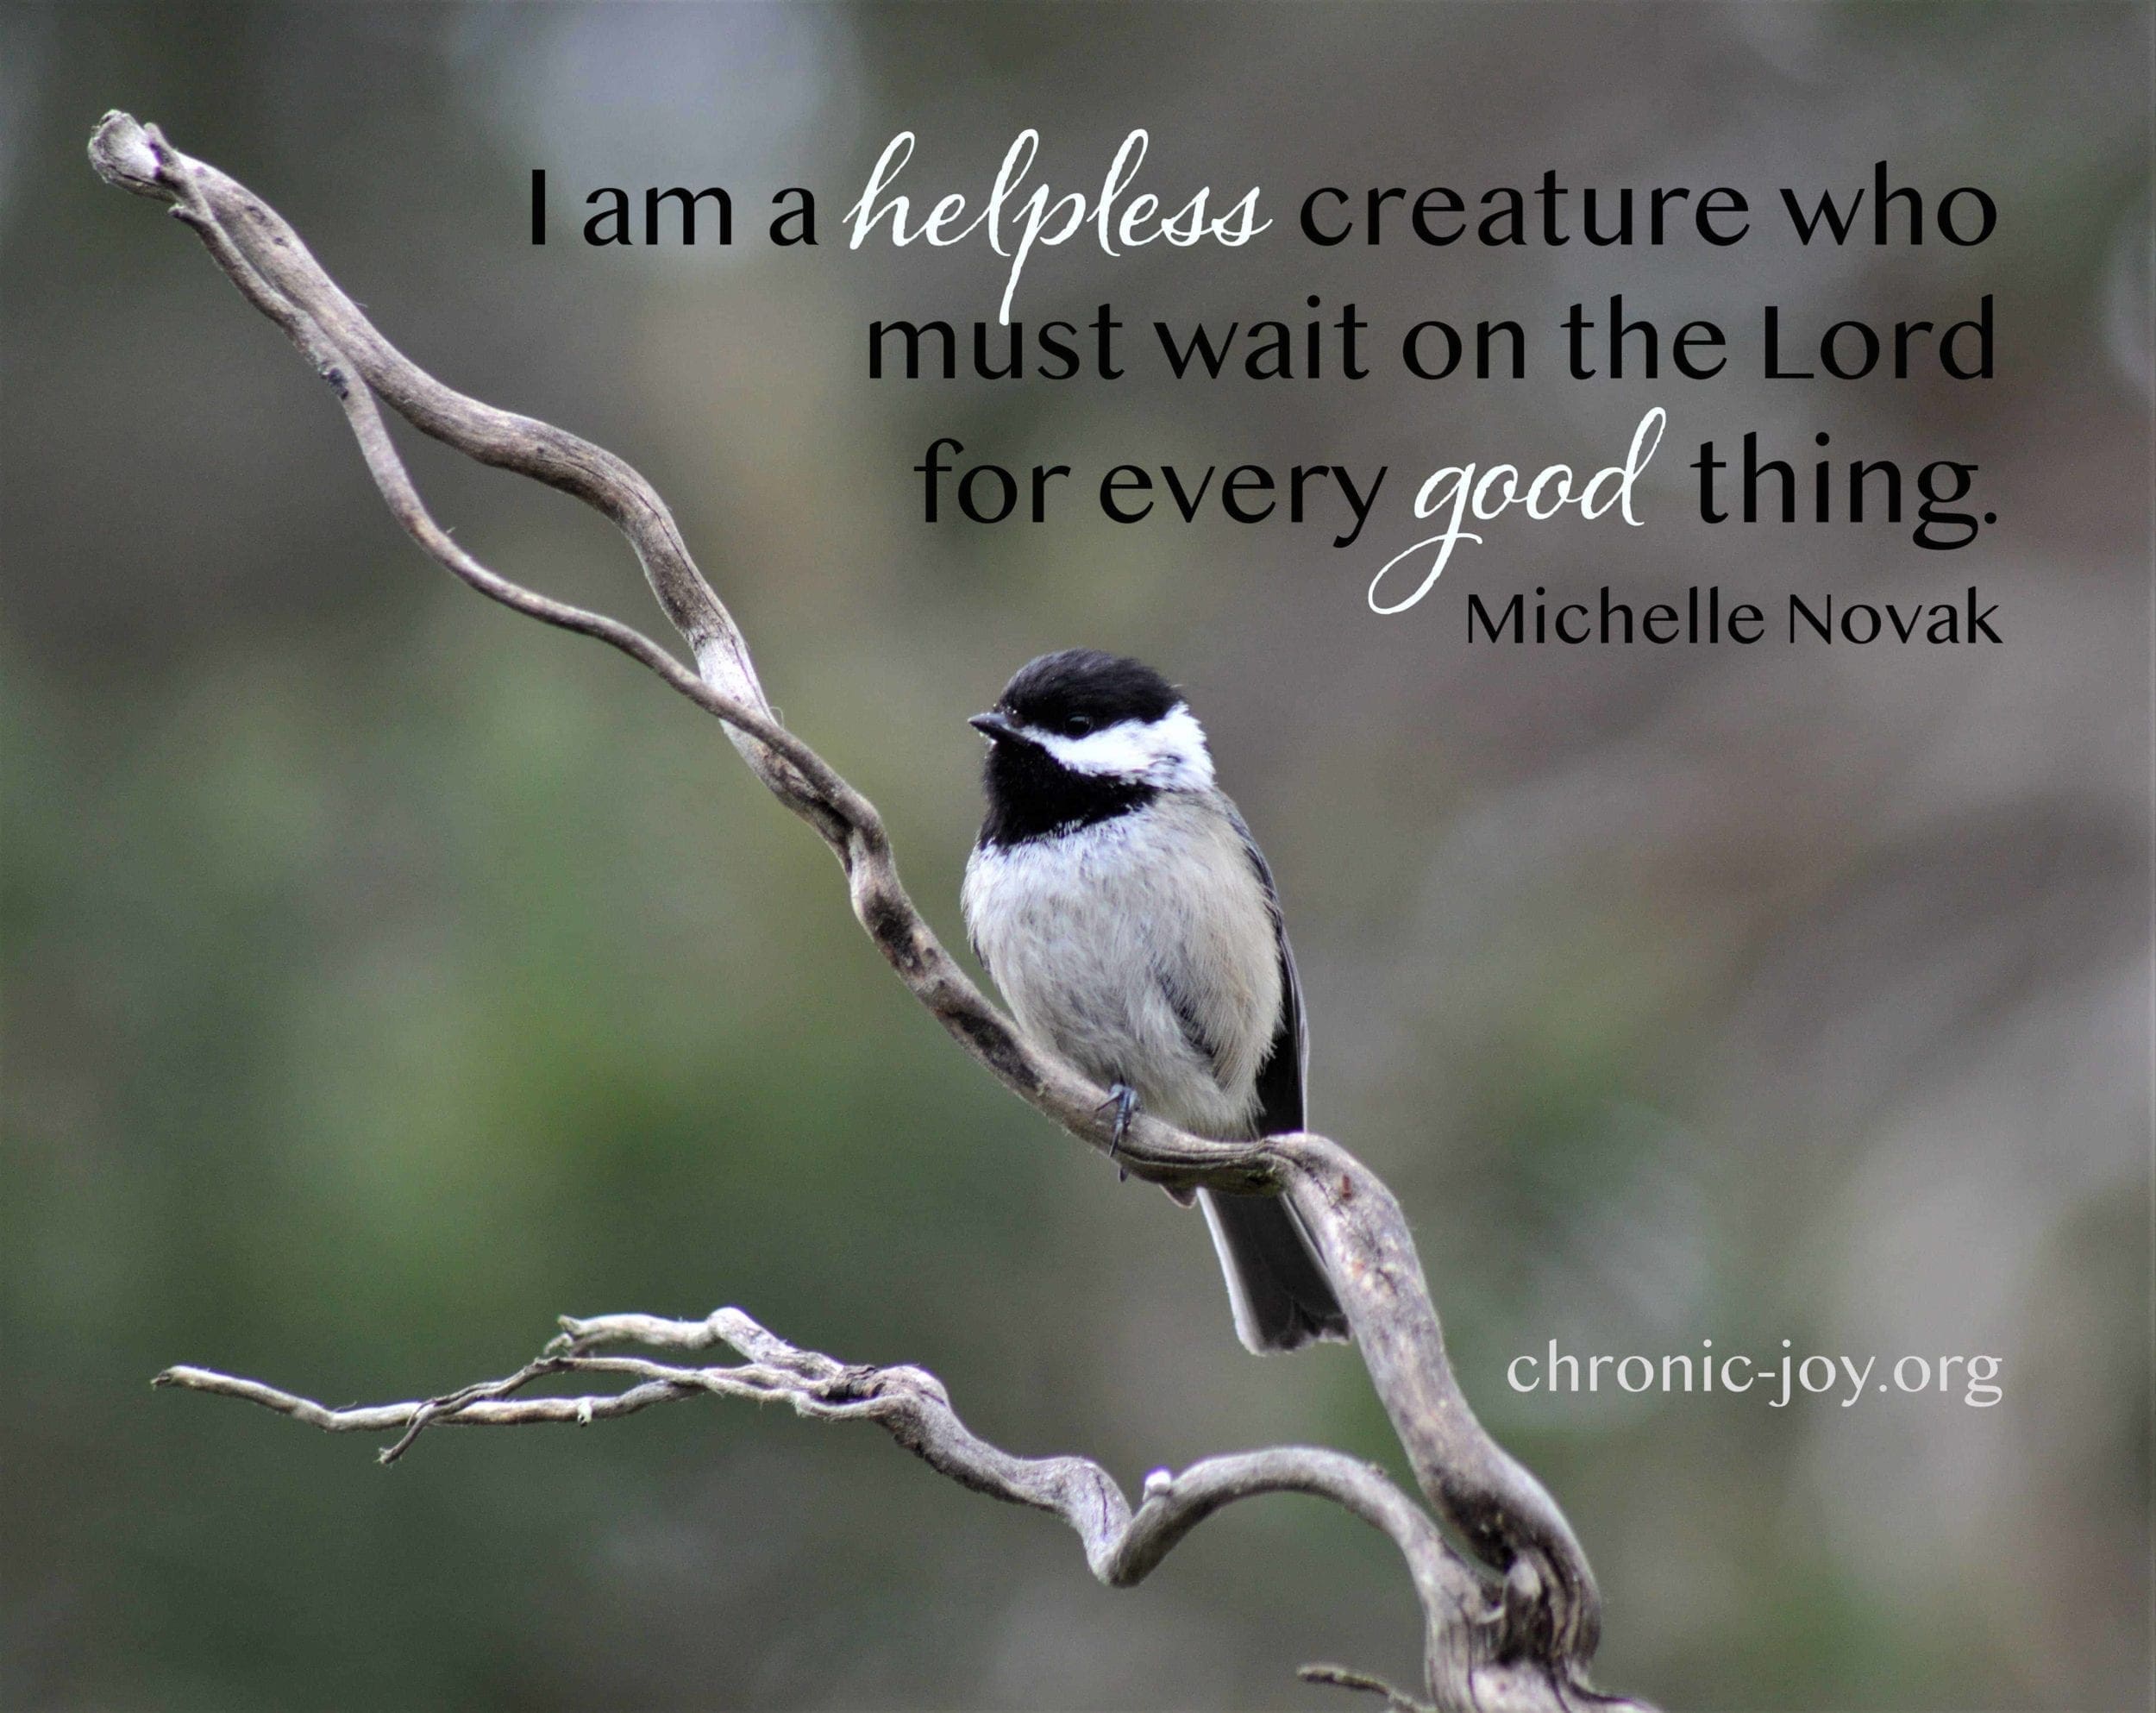 I am a helpless creature who must wait on the Lord for every good thing. Michelle Novak